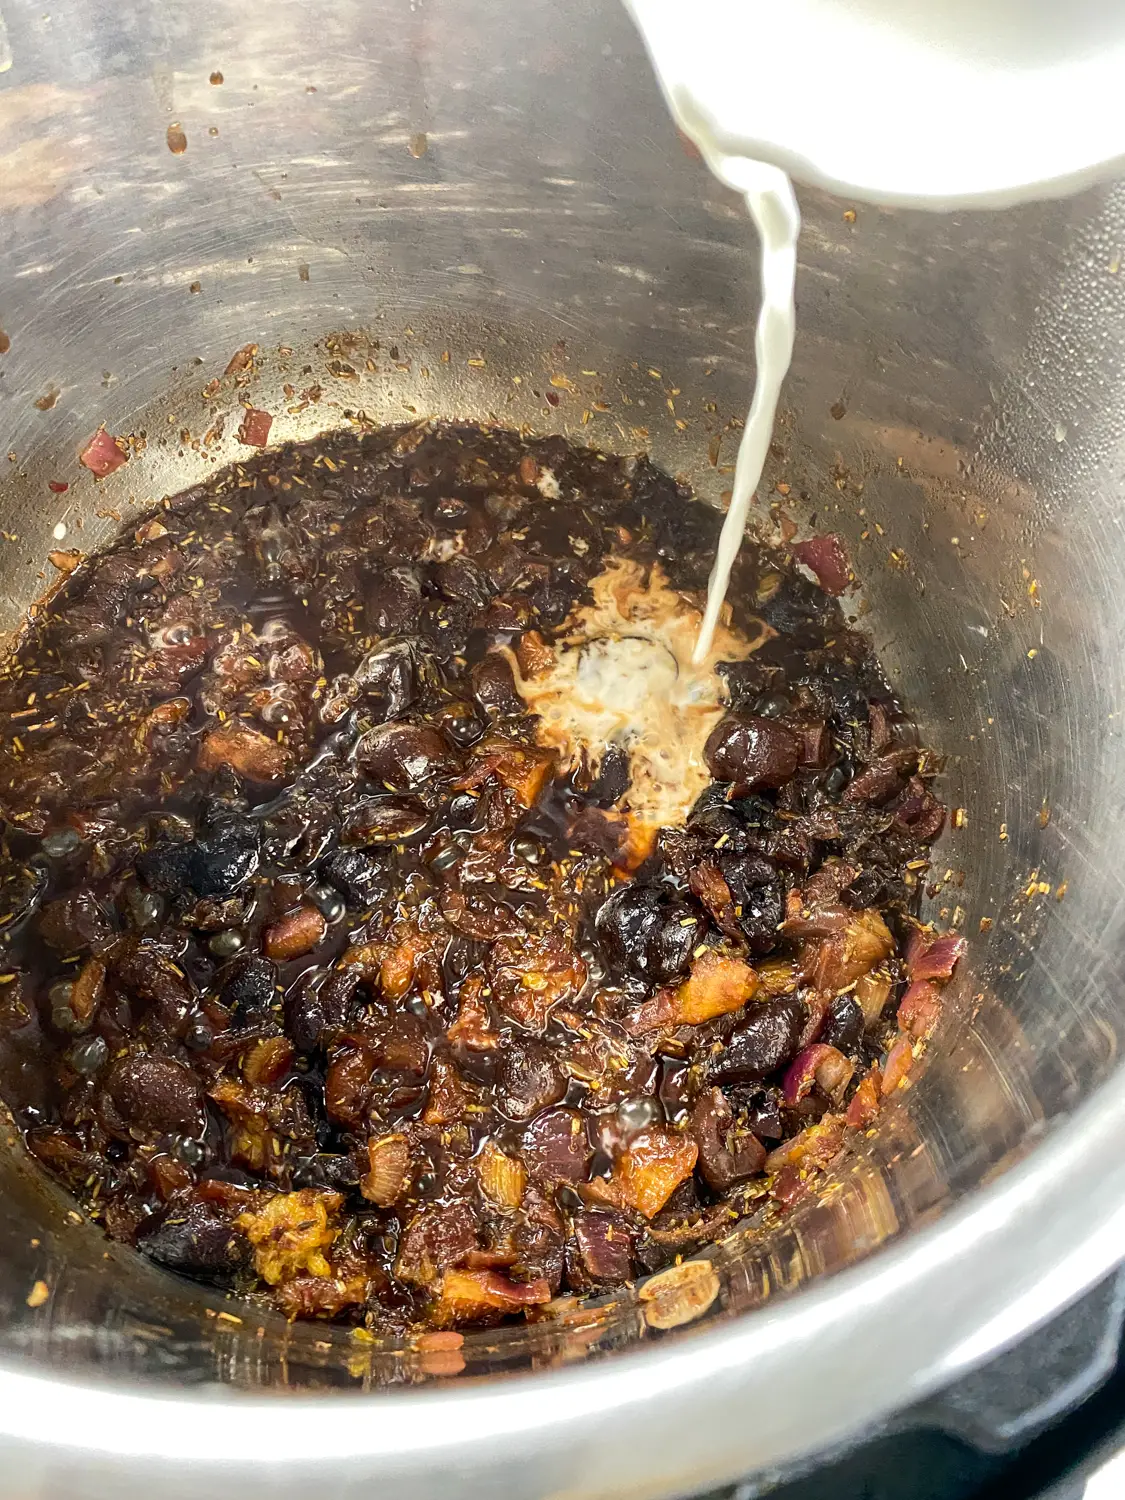 To thicken the chutney, mix the cornstarch and water in a small container.